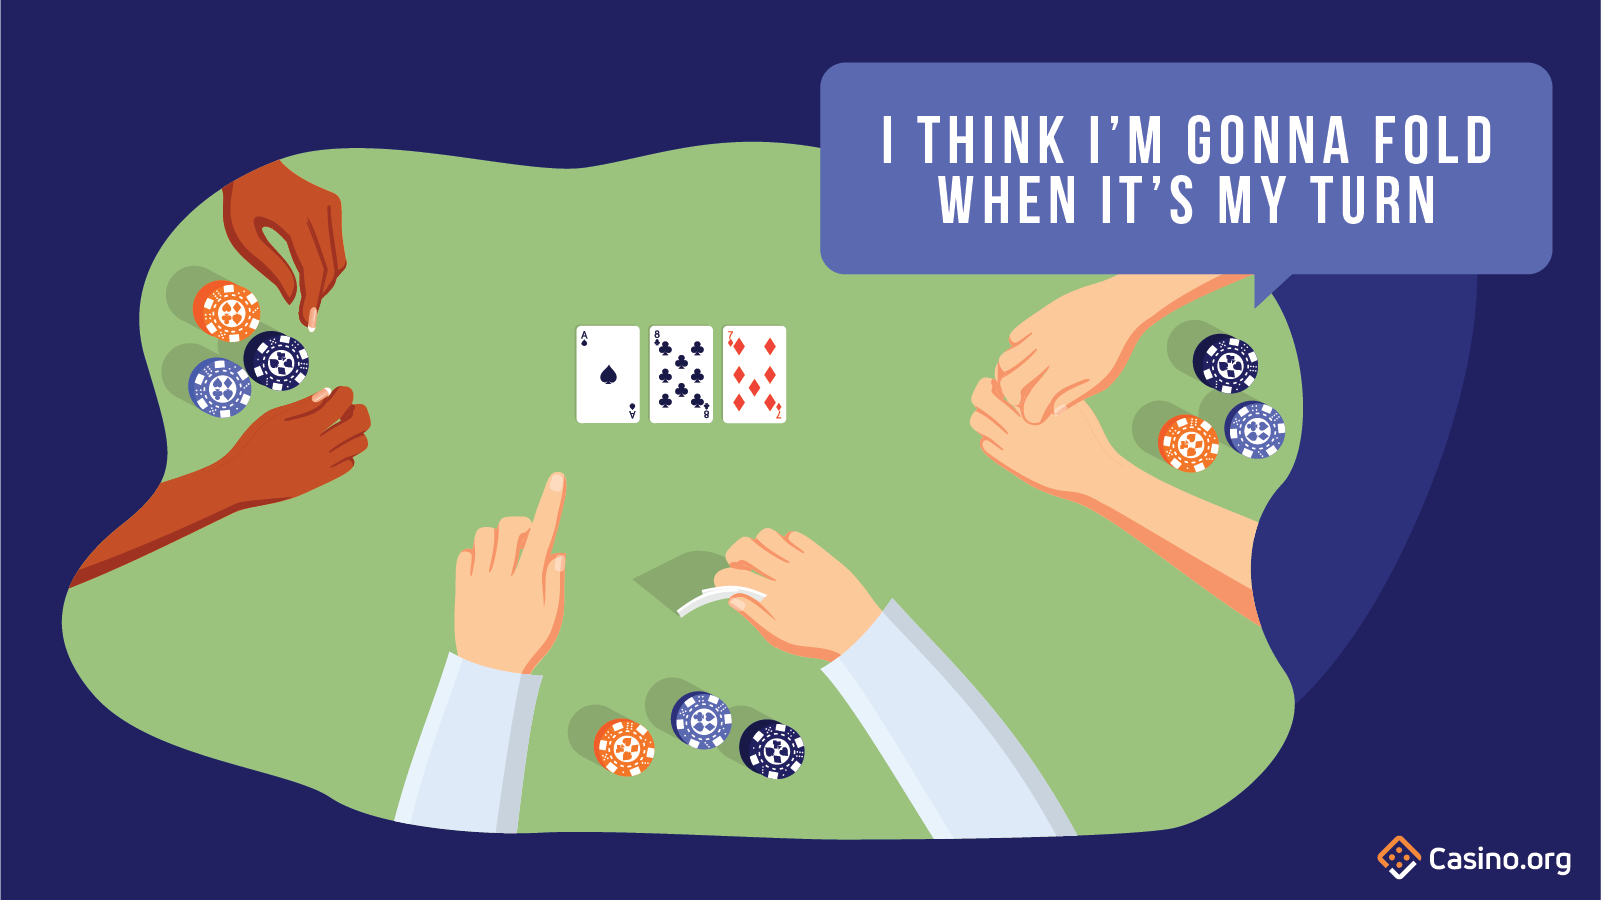 Someone speaking out of turn in poker.